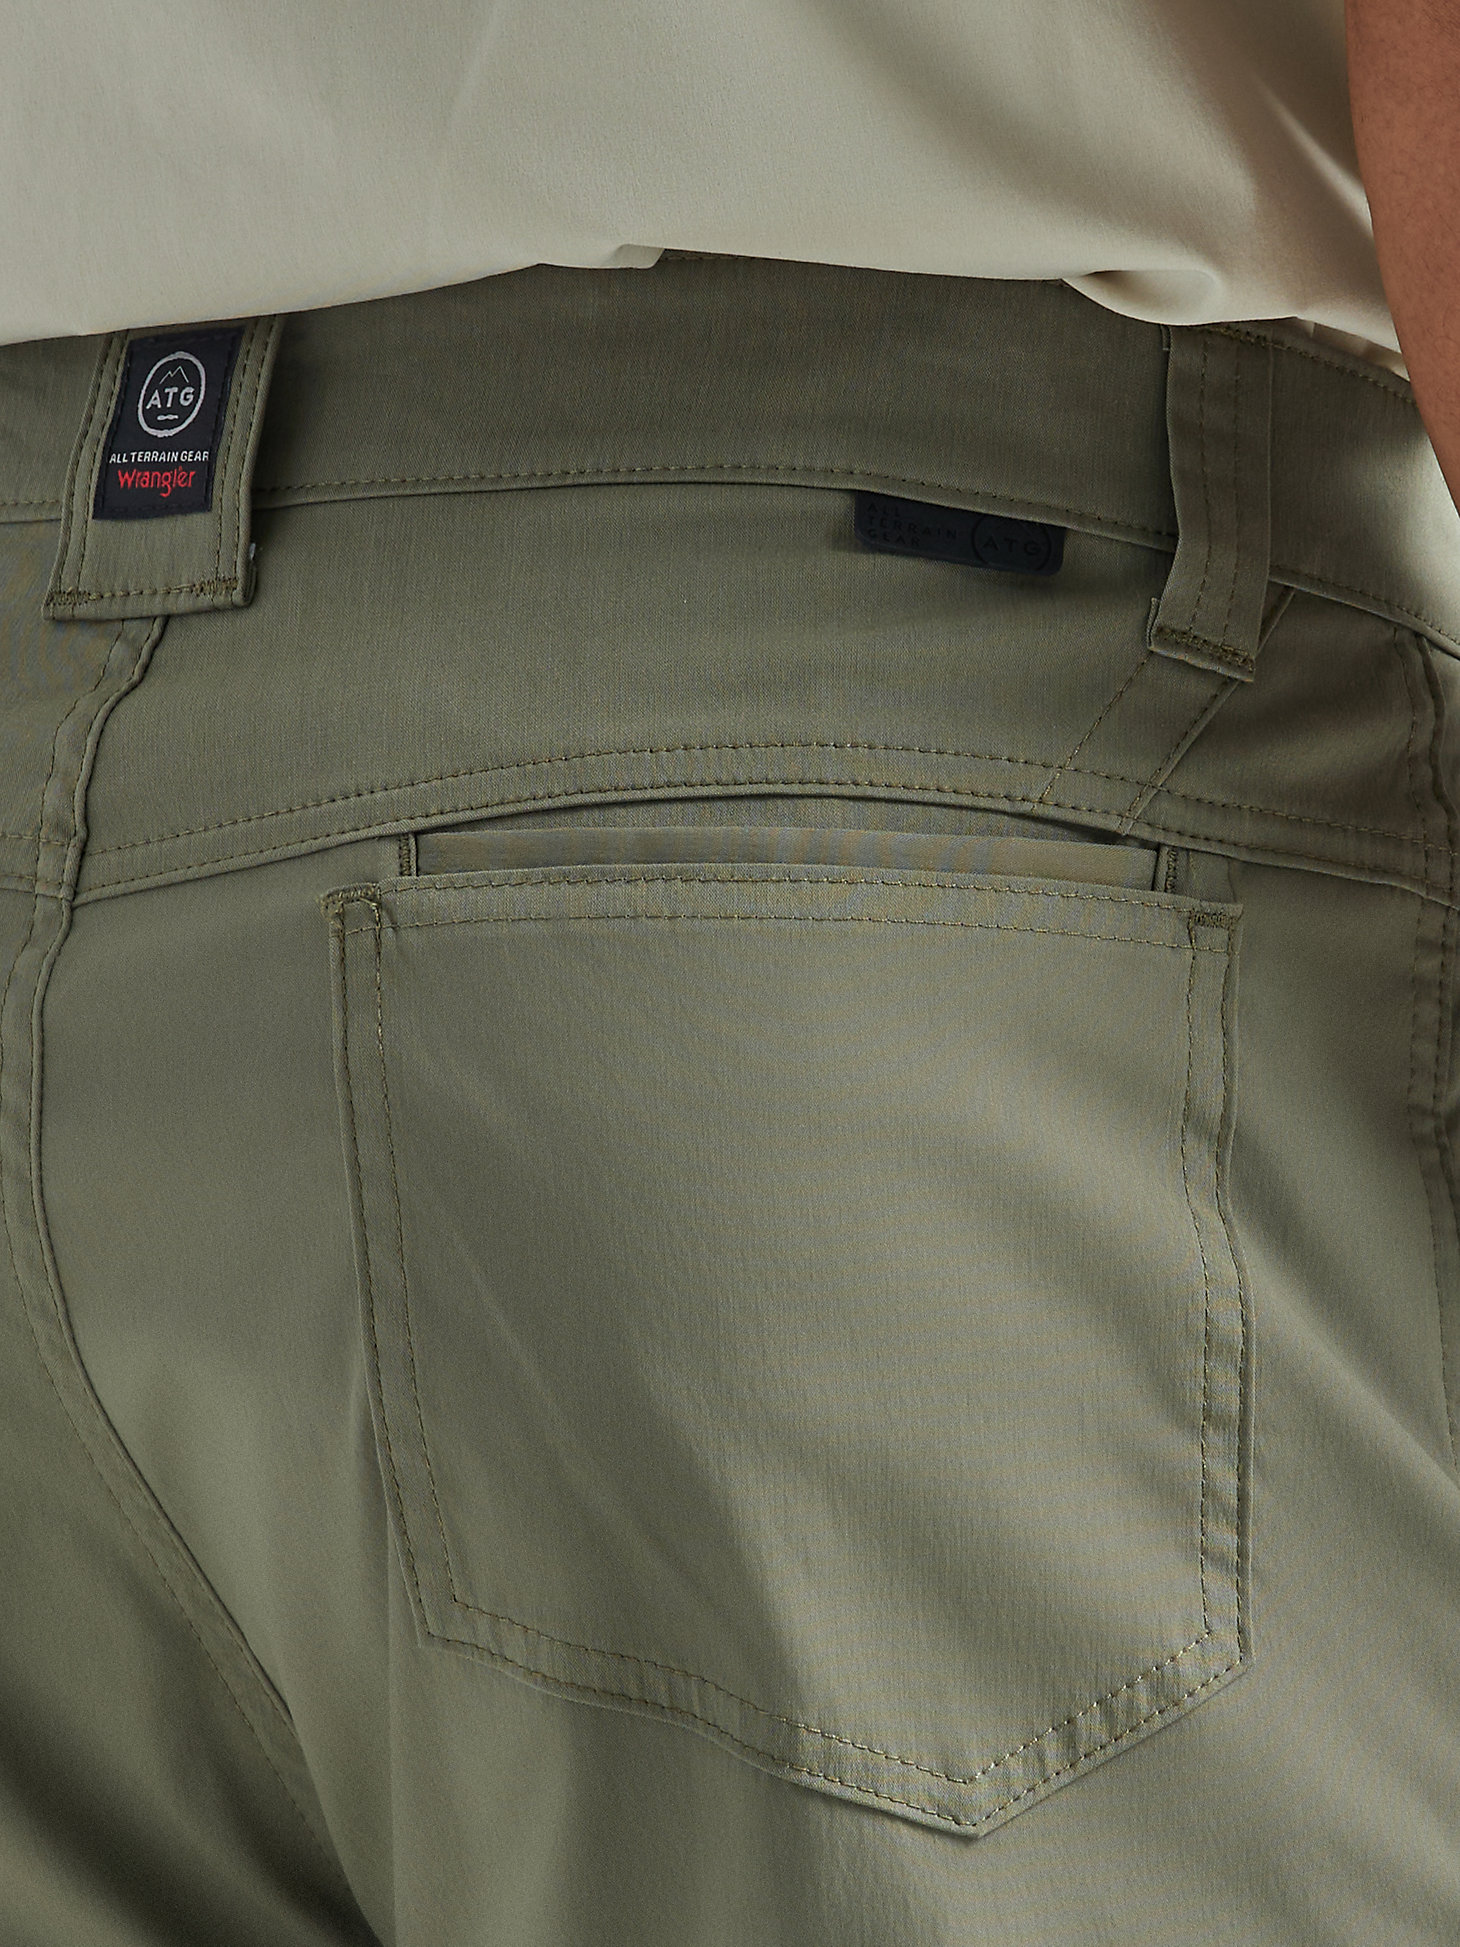 Sustainable Utility Pant in Dusty Olive alternative view 5